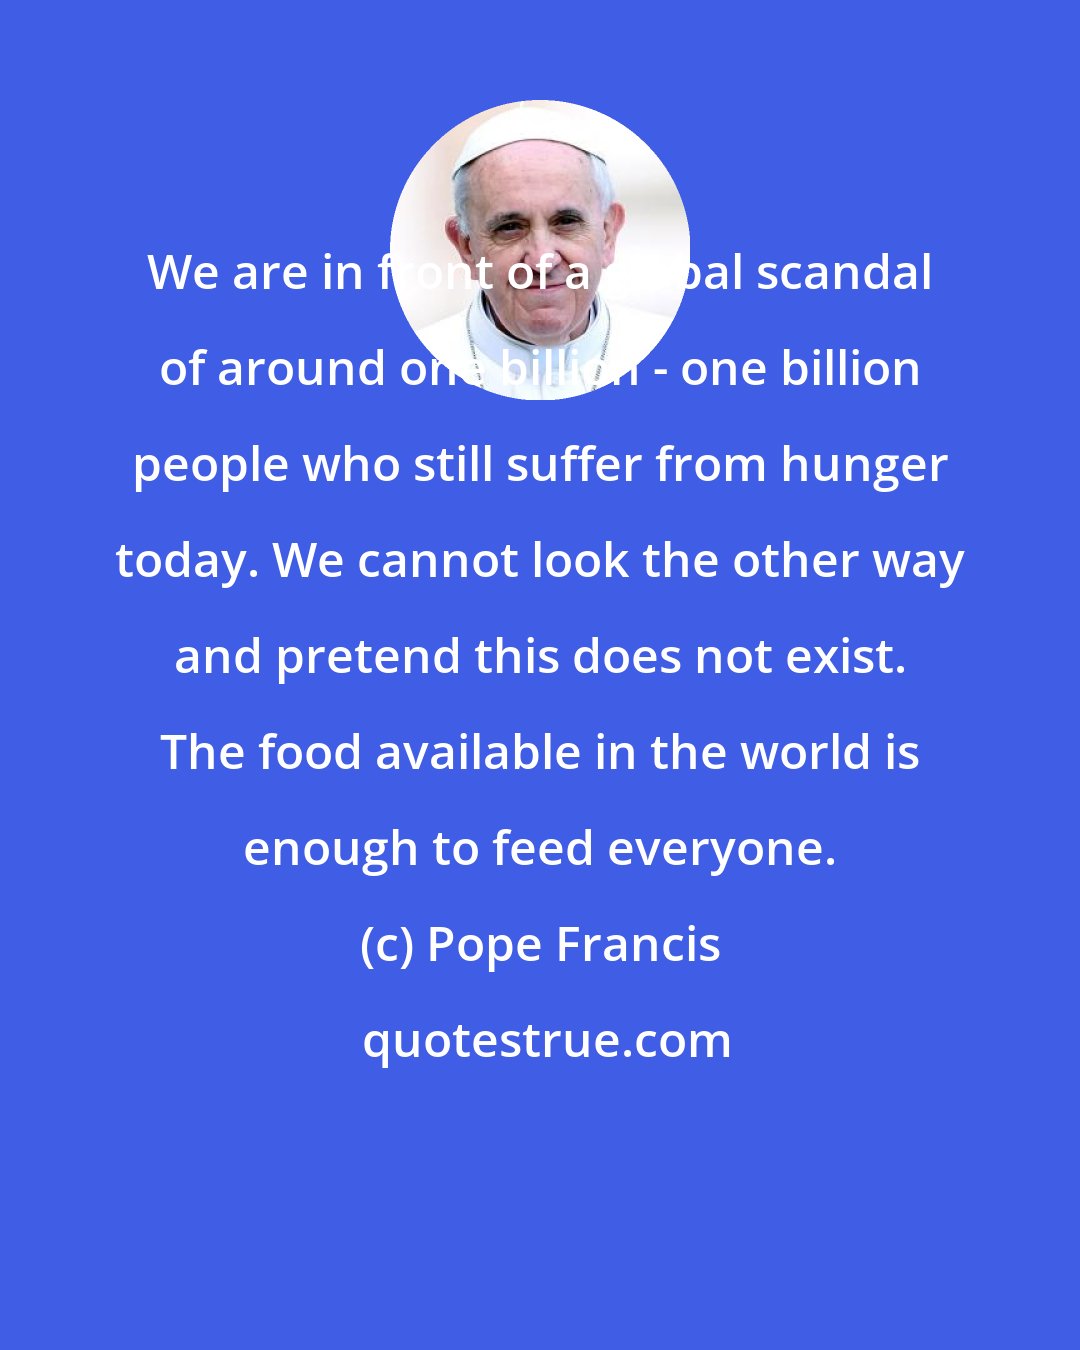 Pope Francis: We are in front of a global scandal of around one billion - one billion people who still suffer from hunger today. We cannot look the other way and pretend this does not exist. The food available in the world is enough to feed everyone.